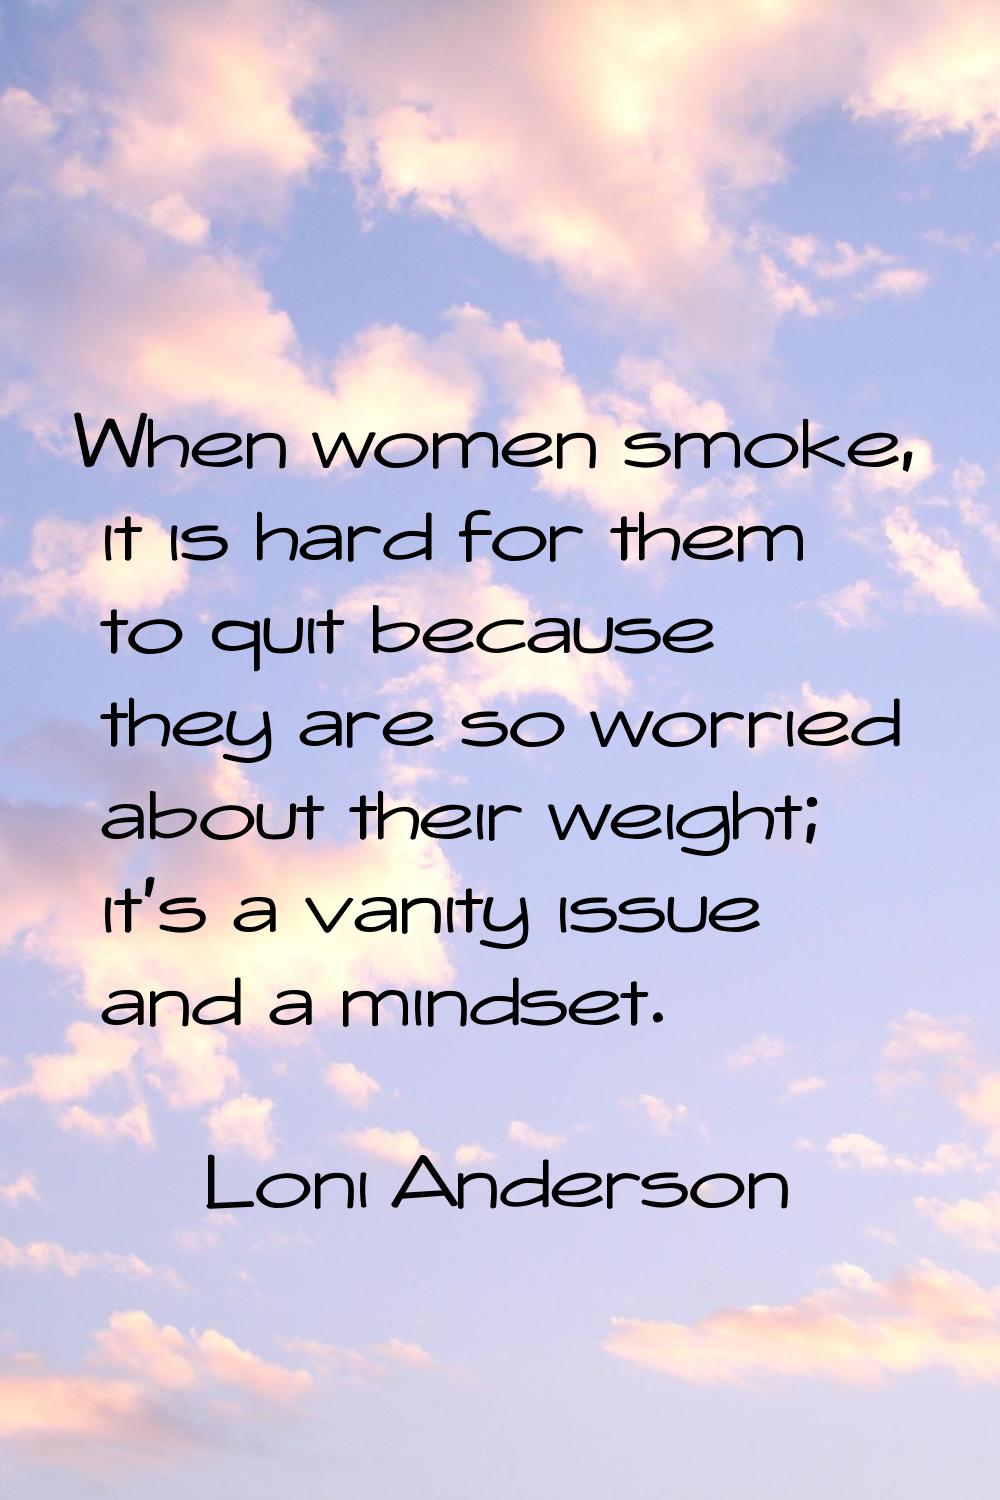 When women smoke, it is hard for them to quit because they are so worried about their weight; it's 